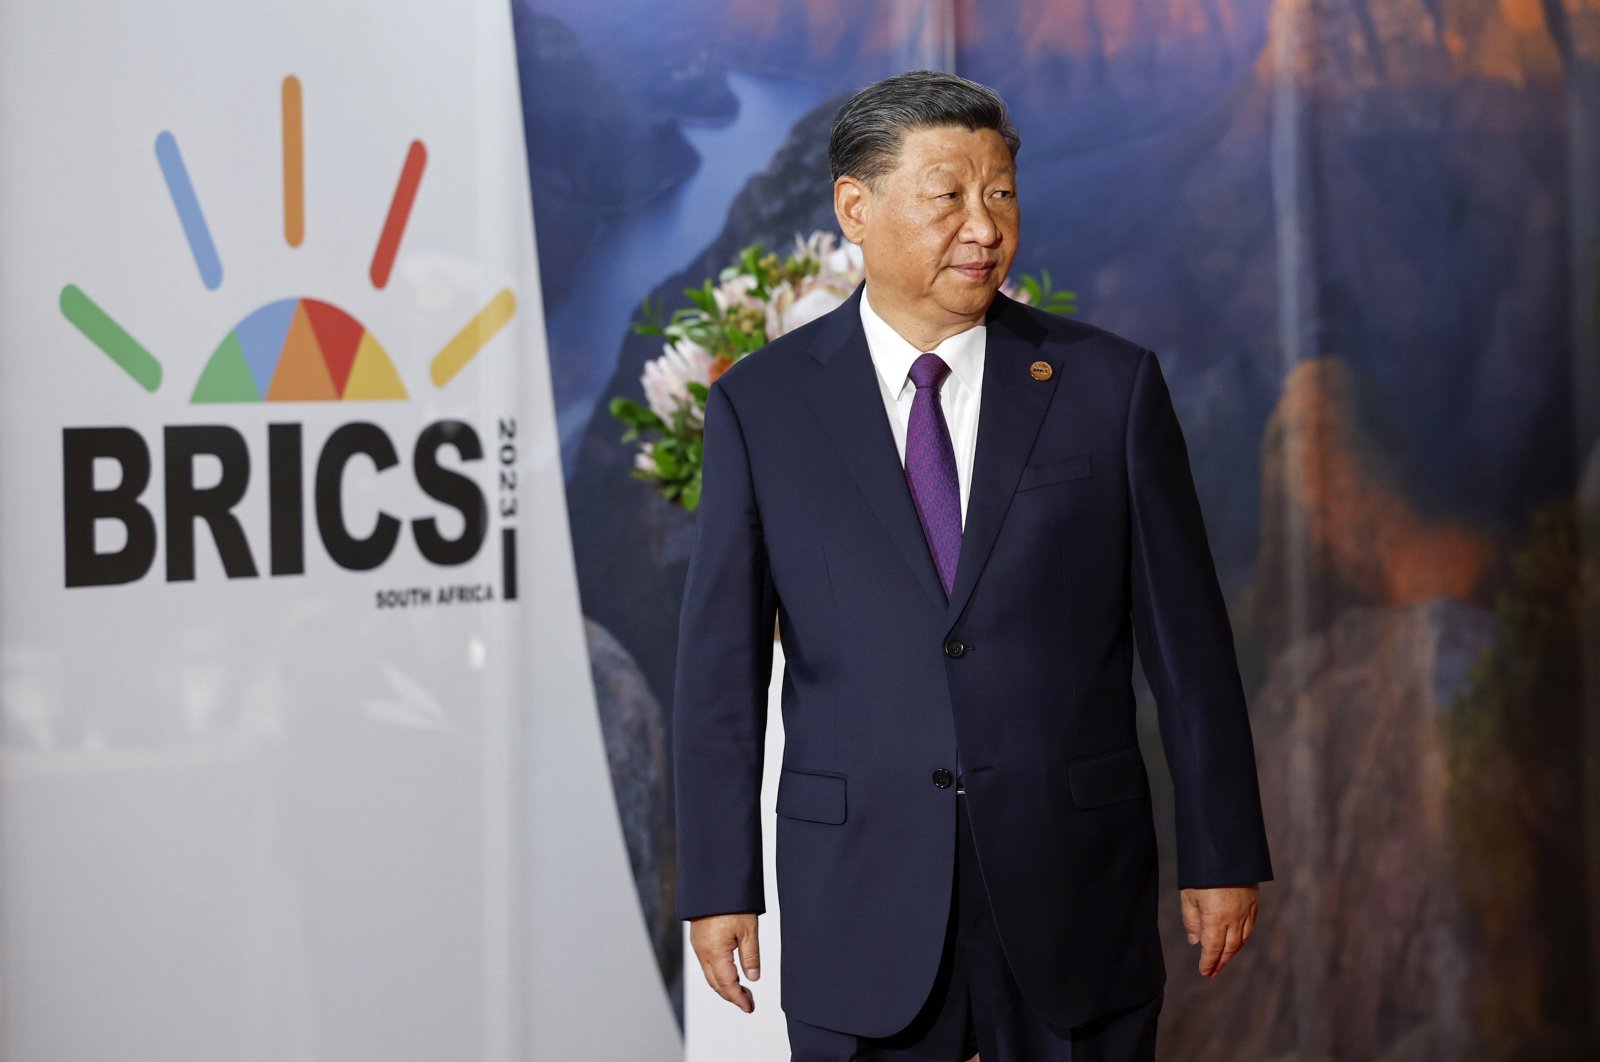 President of China Xi Jinping arrives at the 2023 BRICS Summit in Johannesburg, South Africa, Aug. 23, 2023. (EPA Photo)